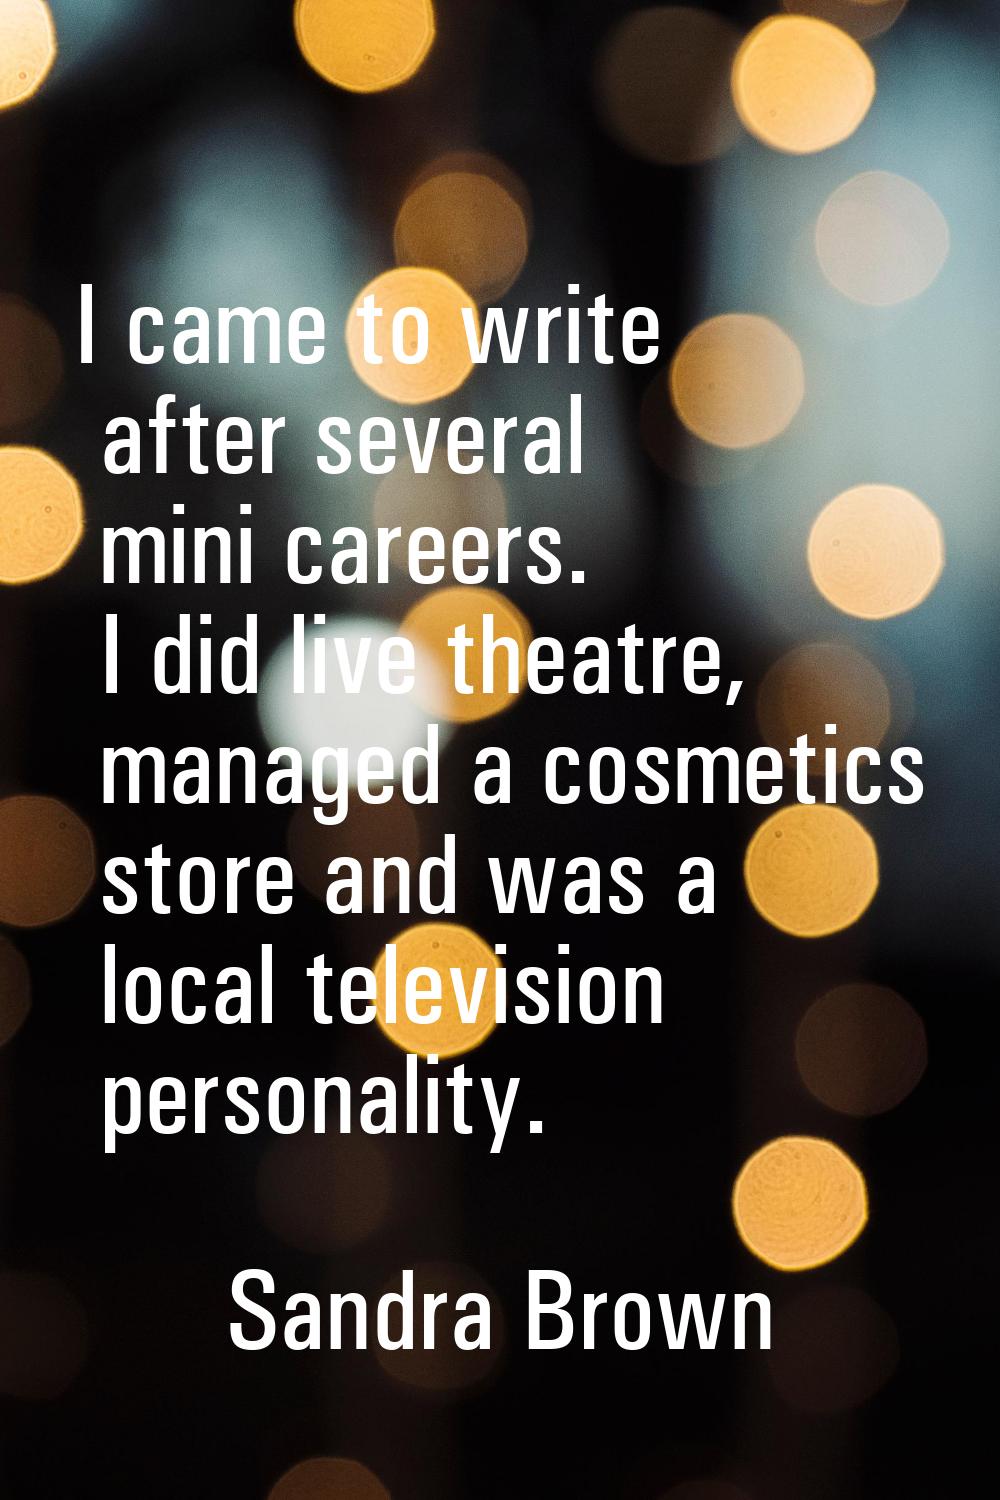 I came to write after several mini careers. I did live theatre, managed a cosmetics store and was a